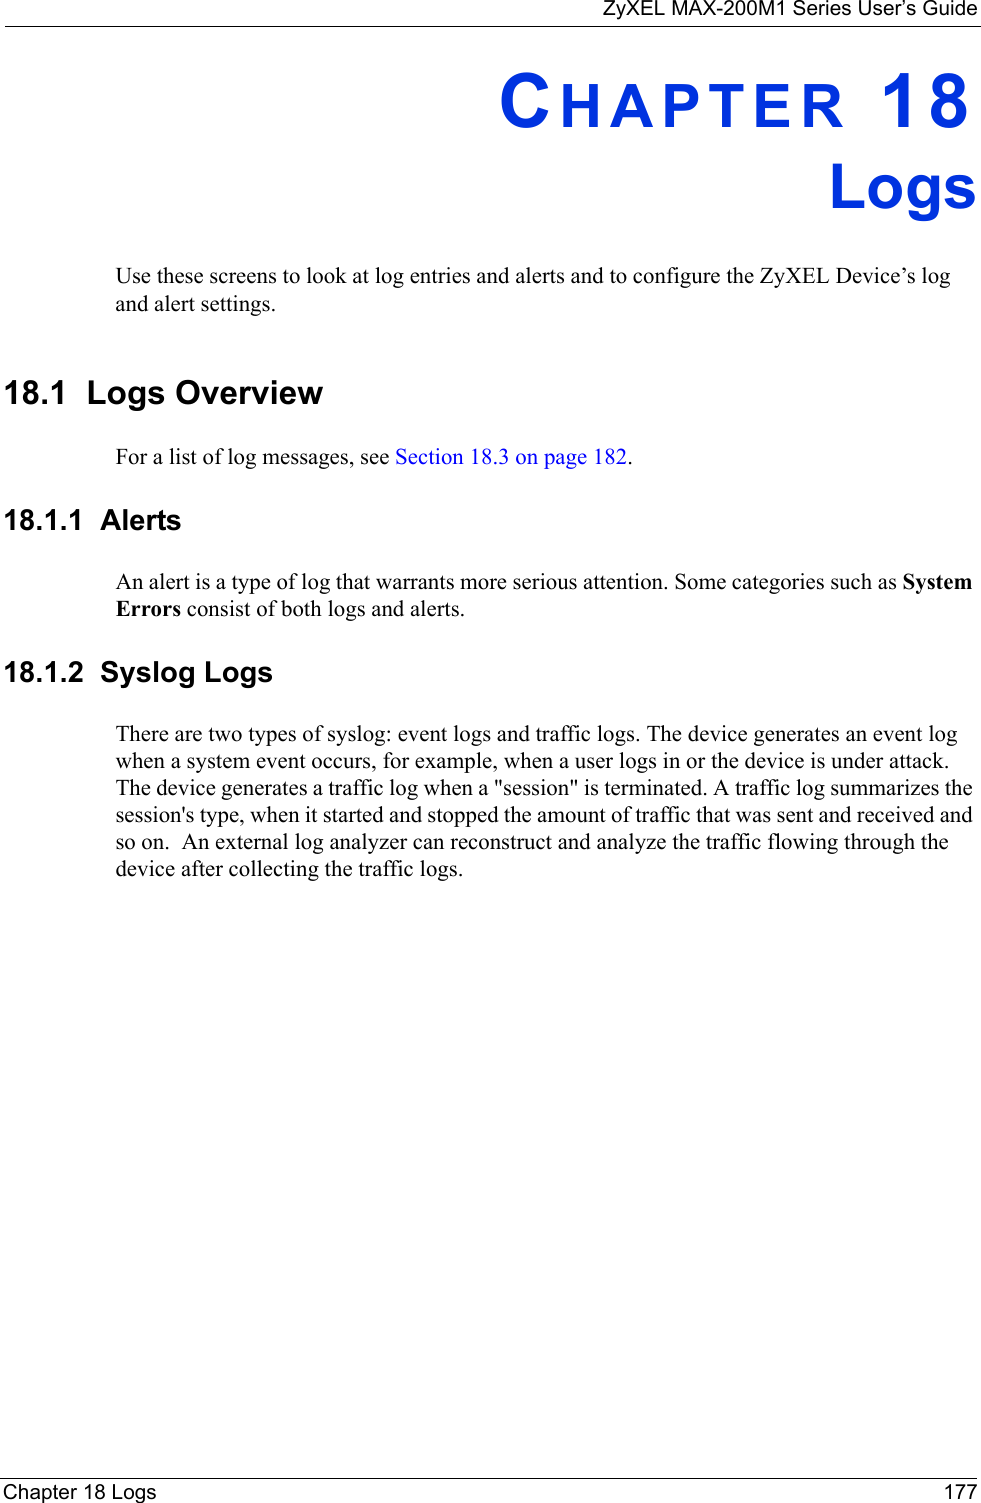 ZyXEL MAX-200M1 Series User’s GuideChapter 18 Logs 177CHAPTER 18LogsUse these screens to look at log entries and alerts and to configure the ZyXEL Device’s log and alert settings.18.1  Logs OverviewFor a list of log messages, see Section 18.3 on page 182.18.1.1  AlertsAn alert is a type of log that warrants more serious attention. Some categories such as System Errors consist of both logs and alerts.18.1.2  Syslog LogsThere are two types of syslog: event logs and traffic logs. The device generates an event log when a system event occurs, for example, when a user logs in or the device is under attack. The device generates a traffic log when a &quot;session&quot; is terminated. A traffic log summarizes the session&apos;s type, when it started and stopped the amount of traffic that was sent and received and so on.  An external log analyzer can reconstruct and analyze the traffic flowing through the device after collecting the traffic logs. 